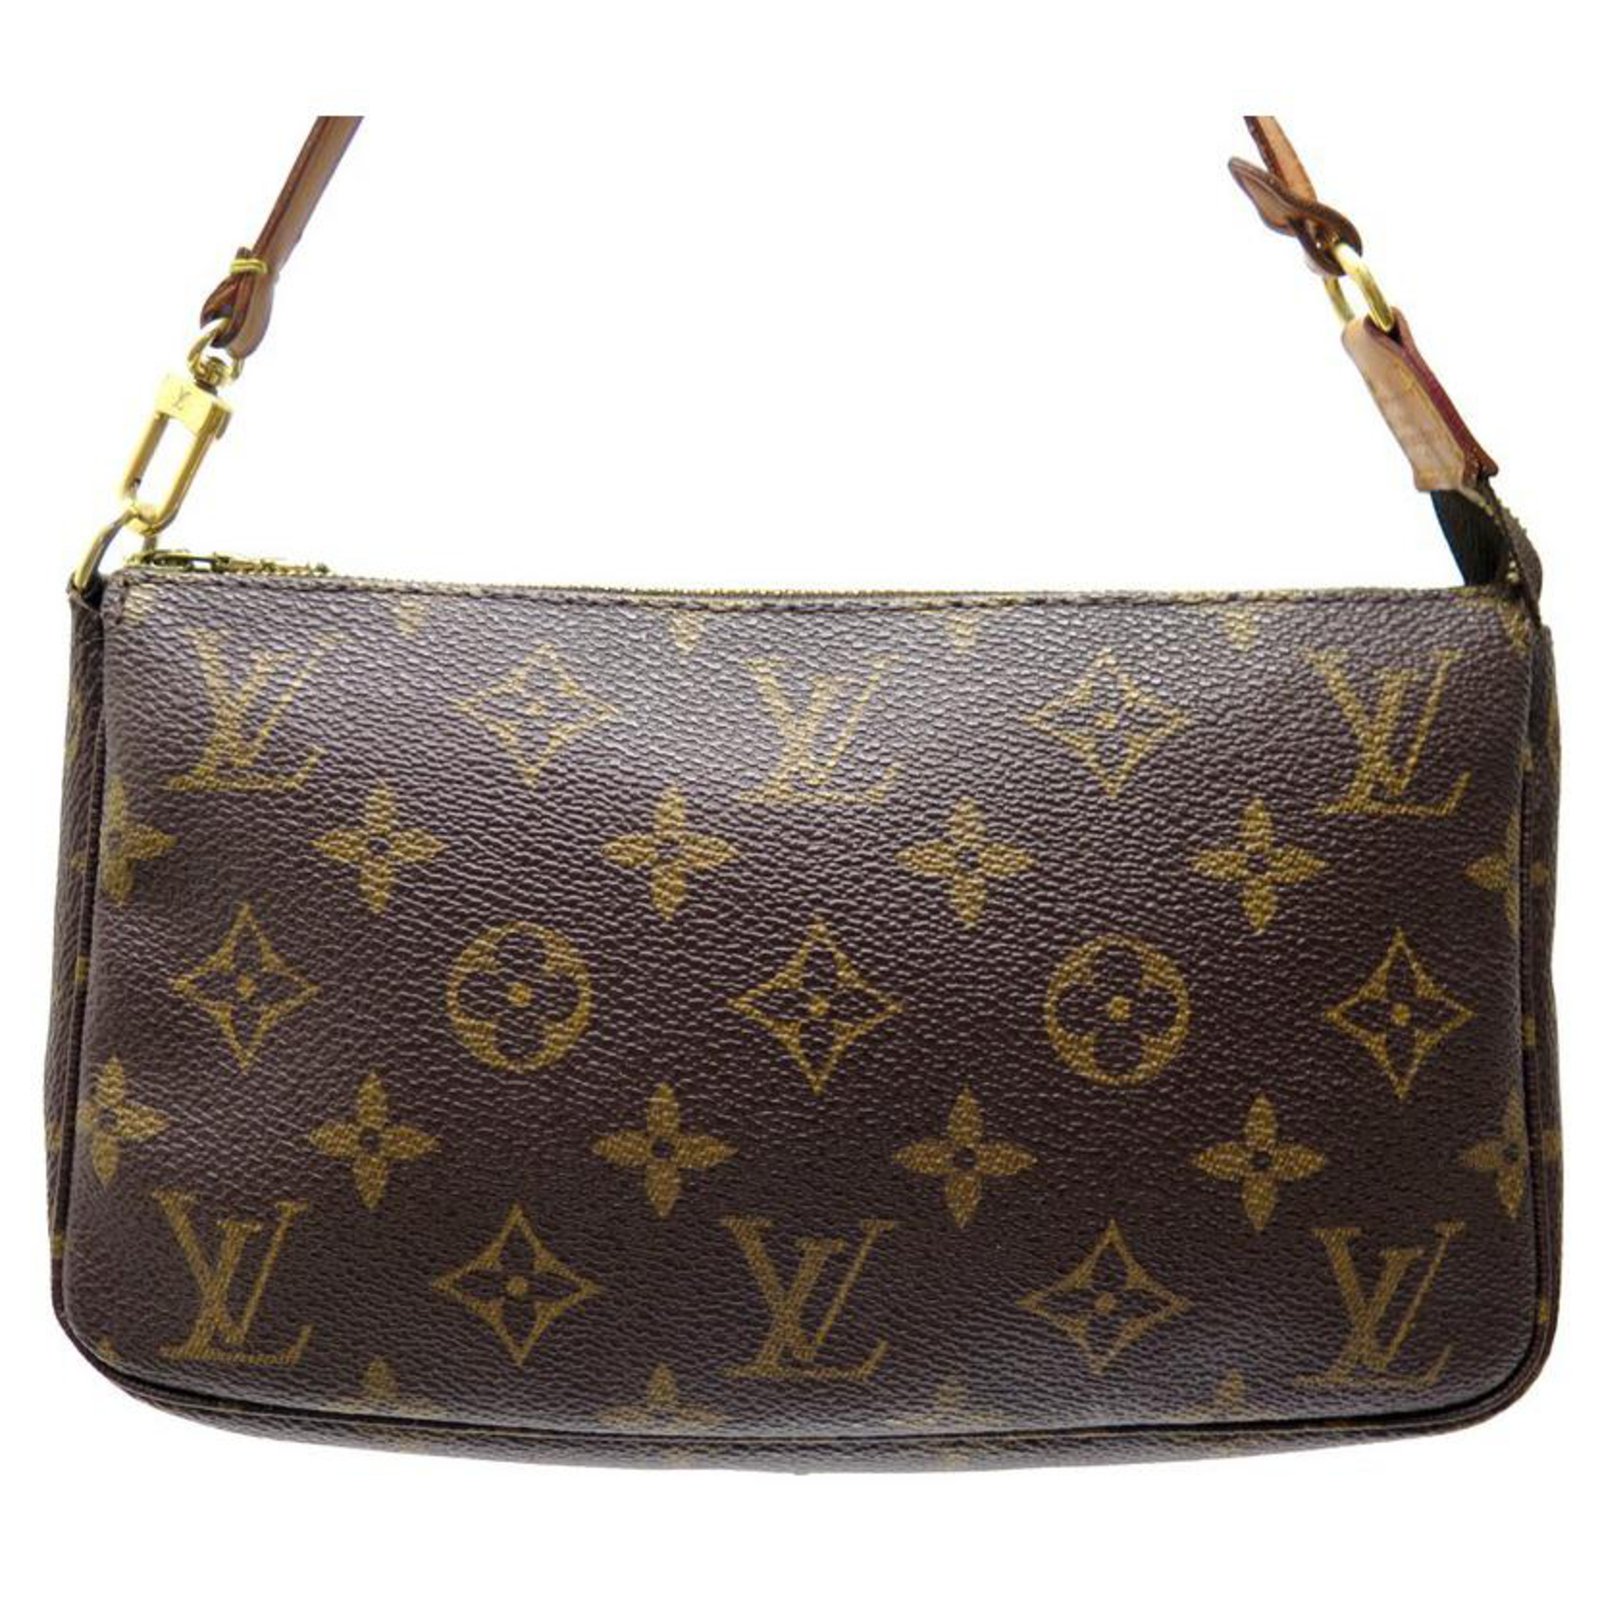 Vintage Accessory Pouch Bag in brown monogram canvas